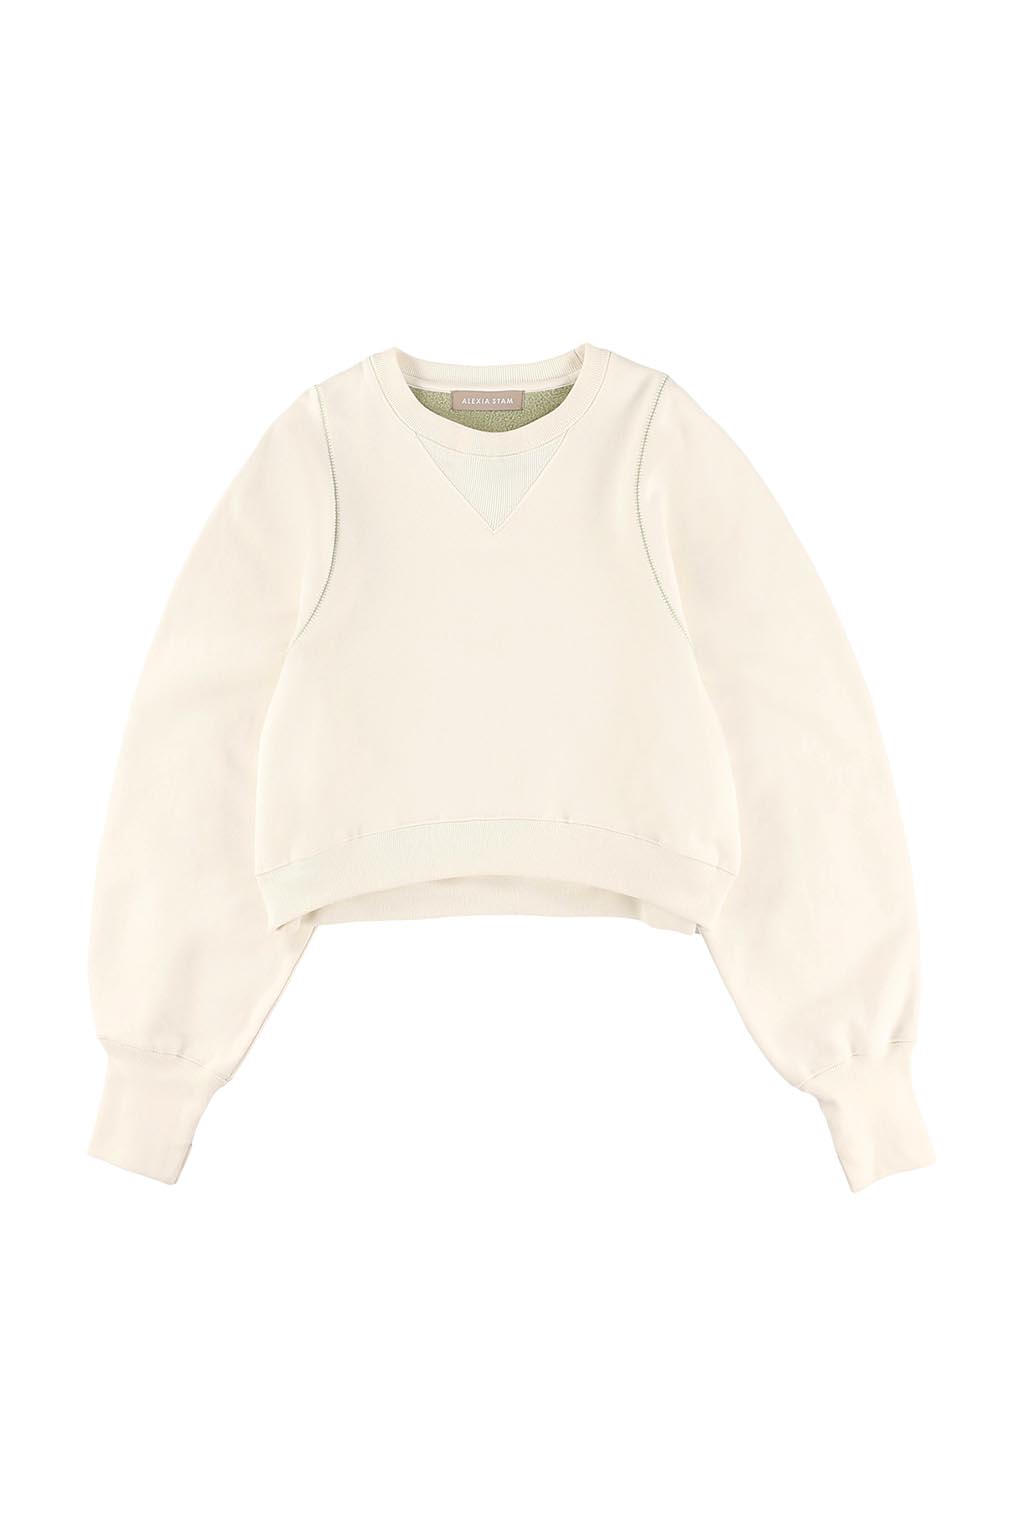 ALEXIA STAM Long Sleeve Cropped Sweat